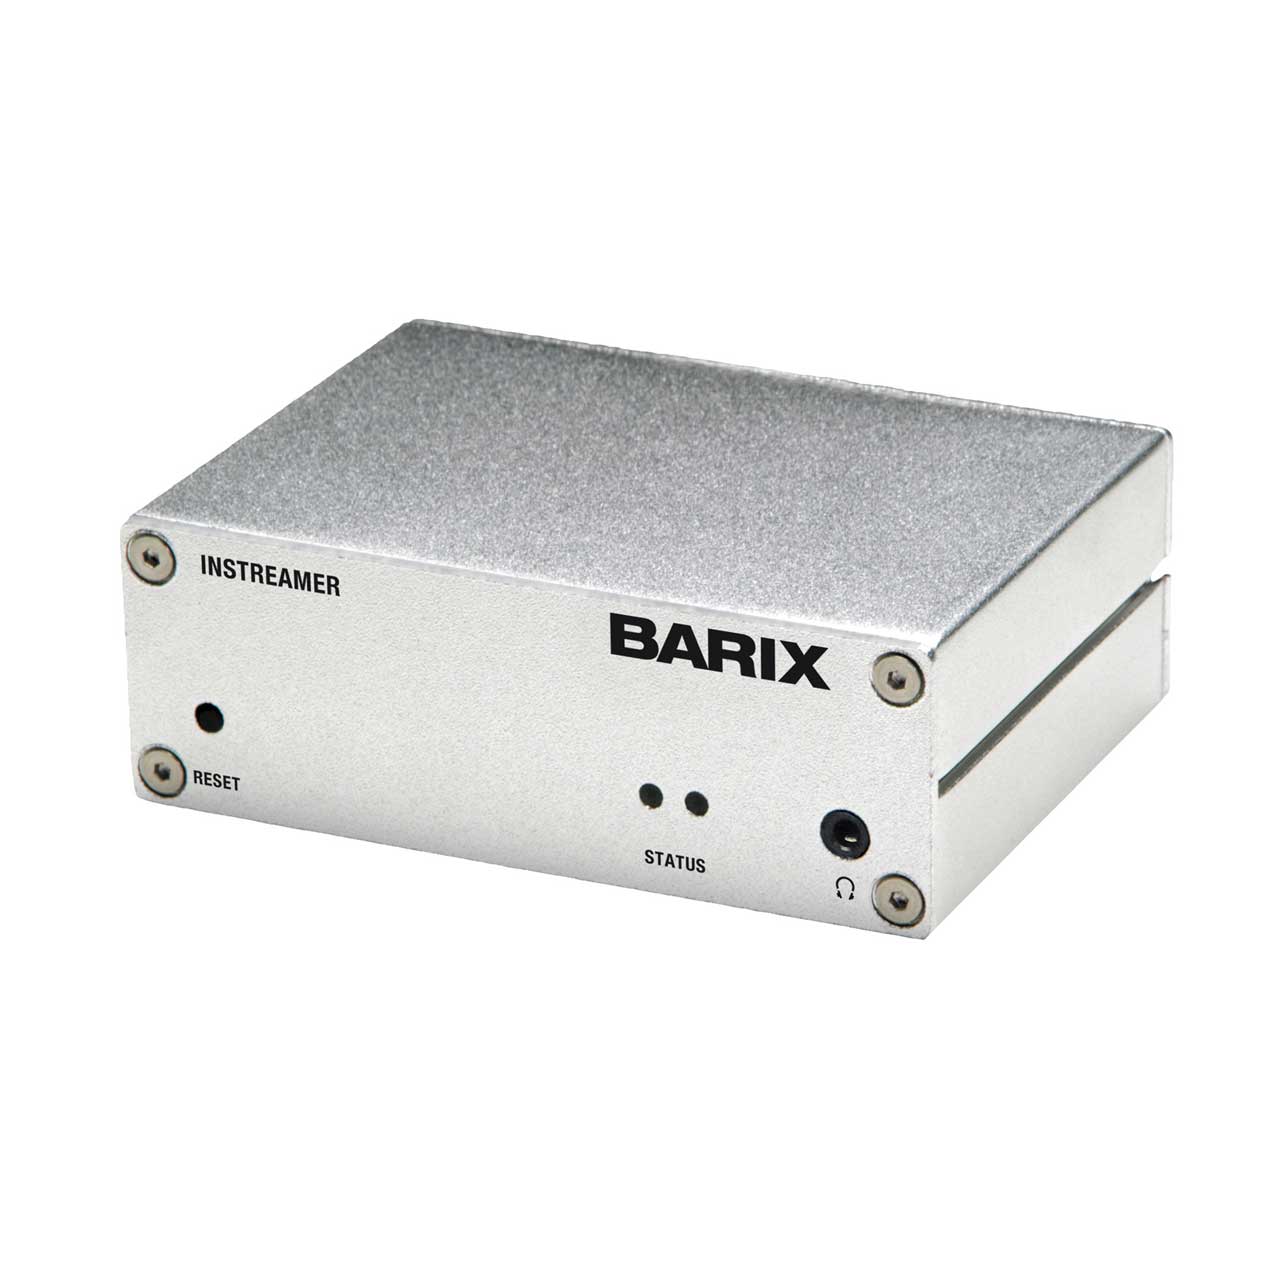 IP-based Audio Monitoring Solution for FM Radio Transmitters – and More from Barix